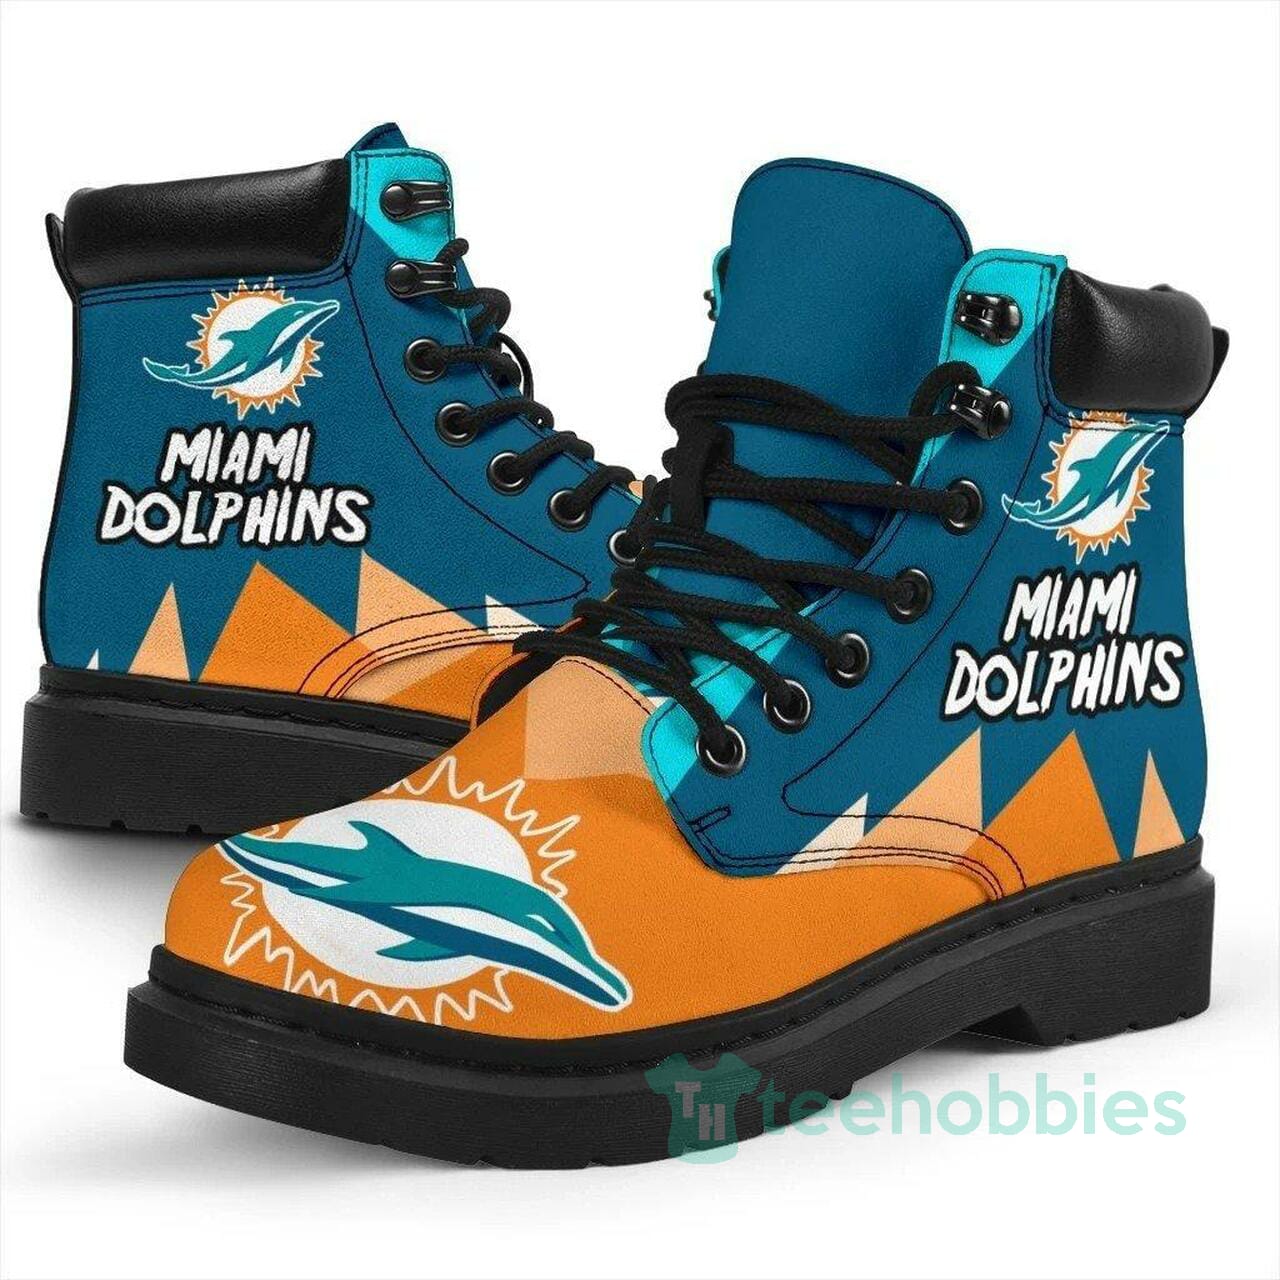 Miami Dolphins Football Leather Boots Men Women Shoes